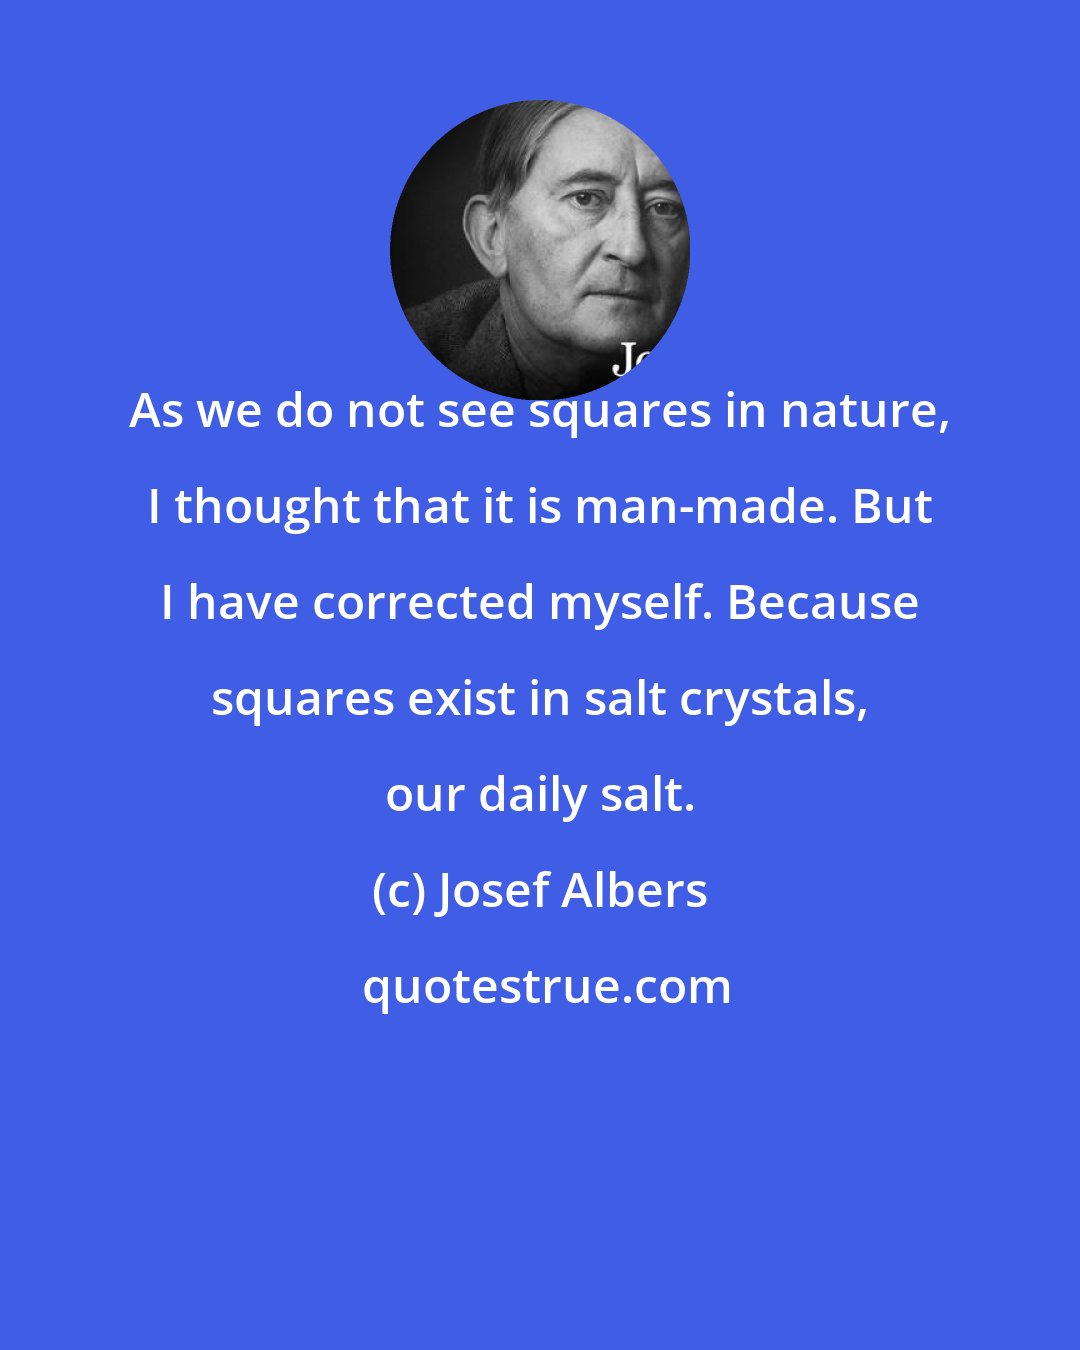 Josef Albers: As we do not see squares in nature, I thought that it is man-made. But I have corrected myself. Because squares exist in salt crystals, our daily salt.